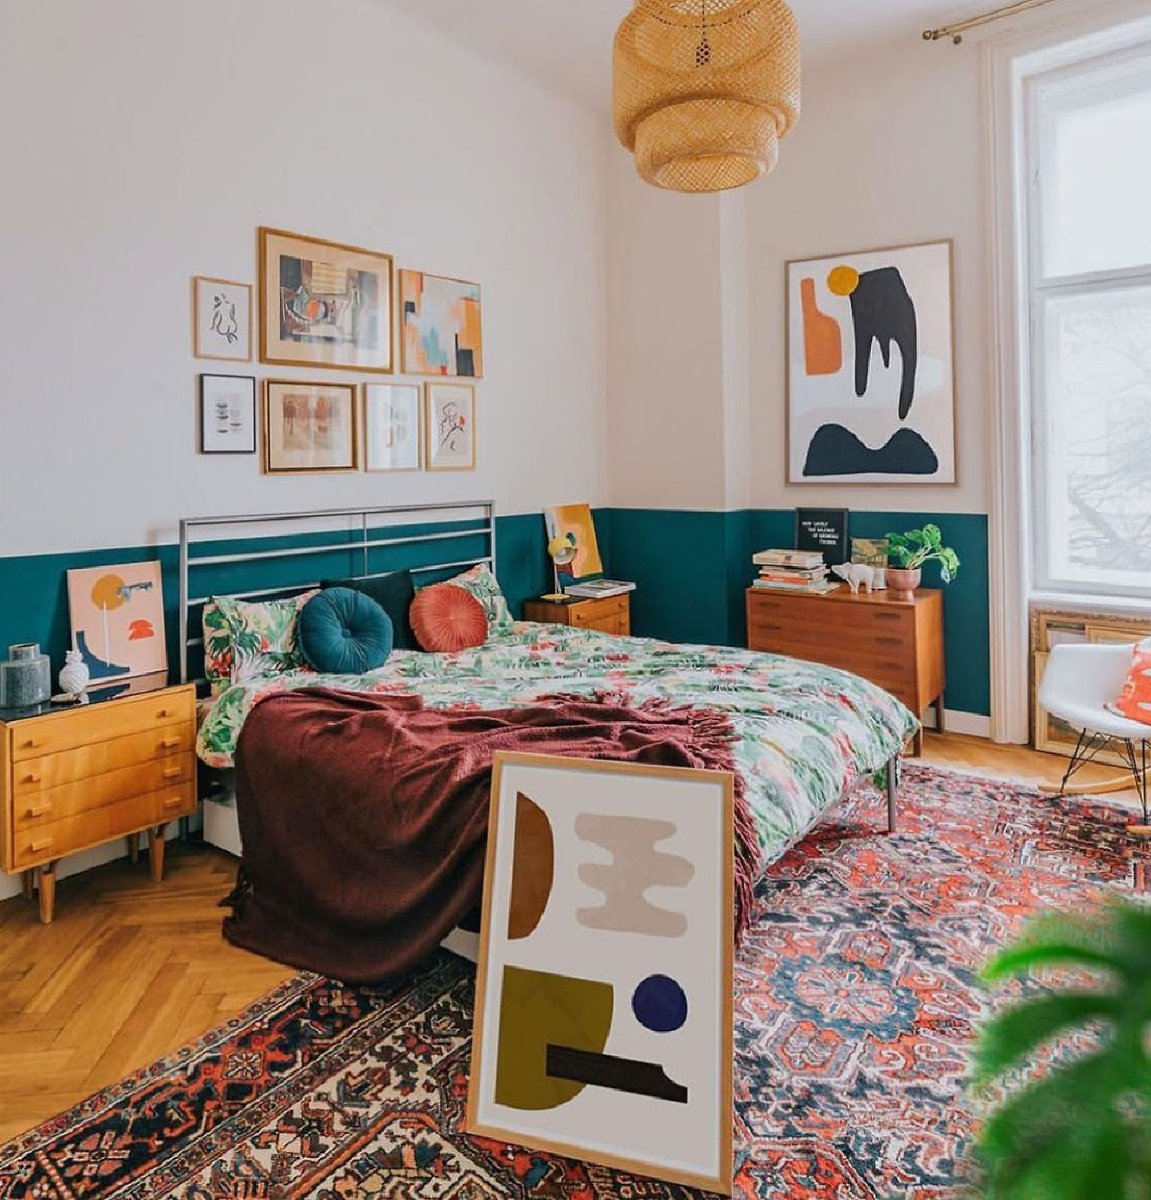 One additional bedroom can make all the difference if you need extra space in your home. tim-anderson.cb1.so/fwx7i5